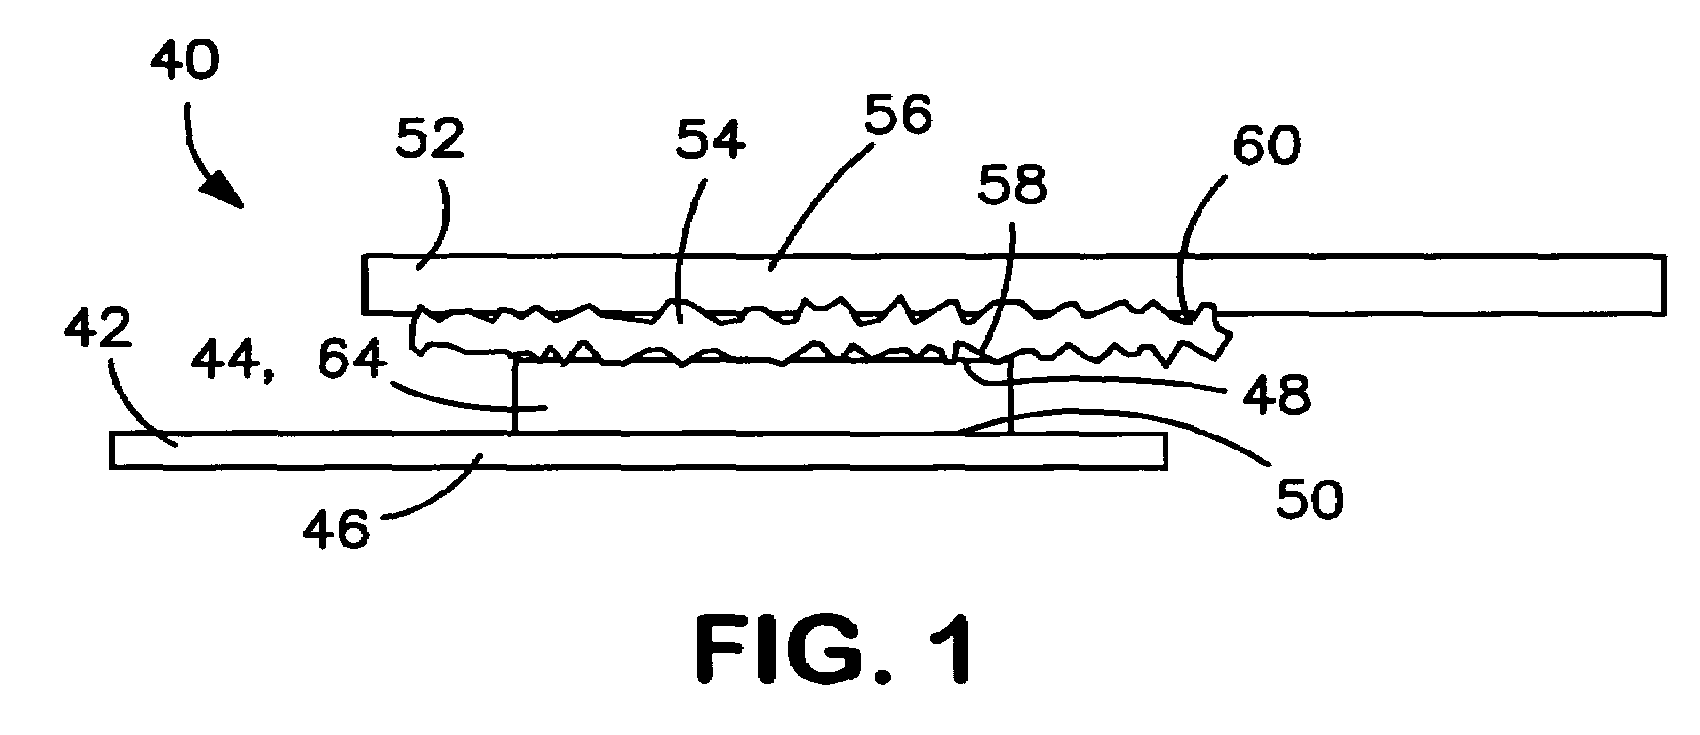 Methods to modify the fibrous landing layer of a foam based fastener and products made from the same